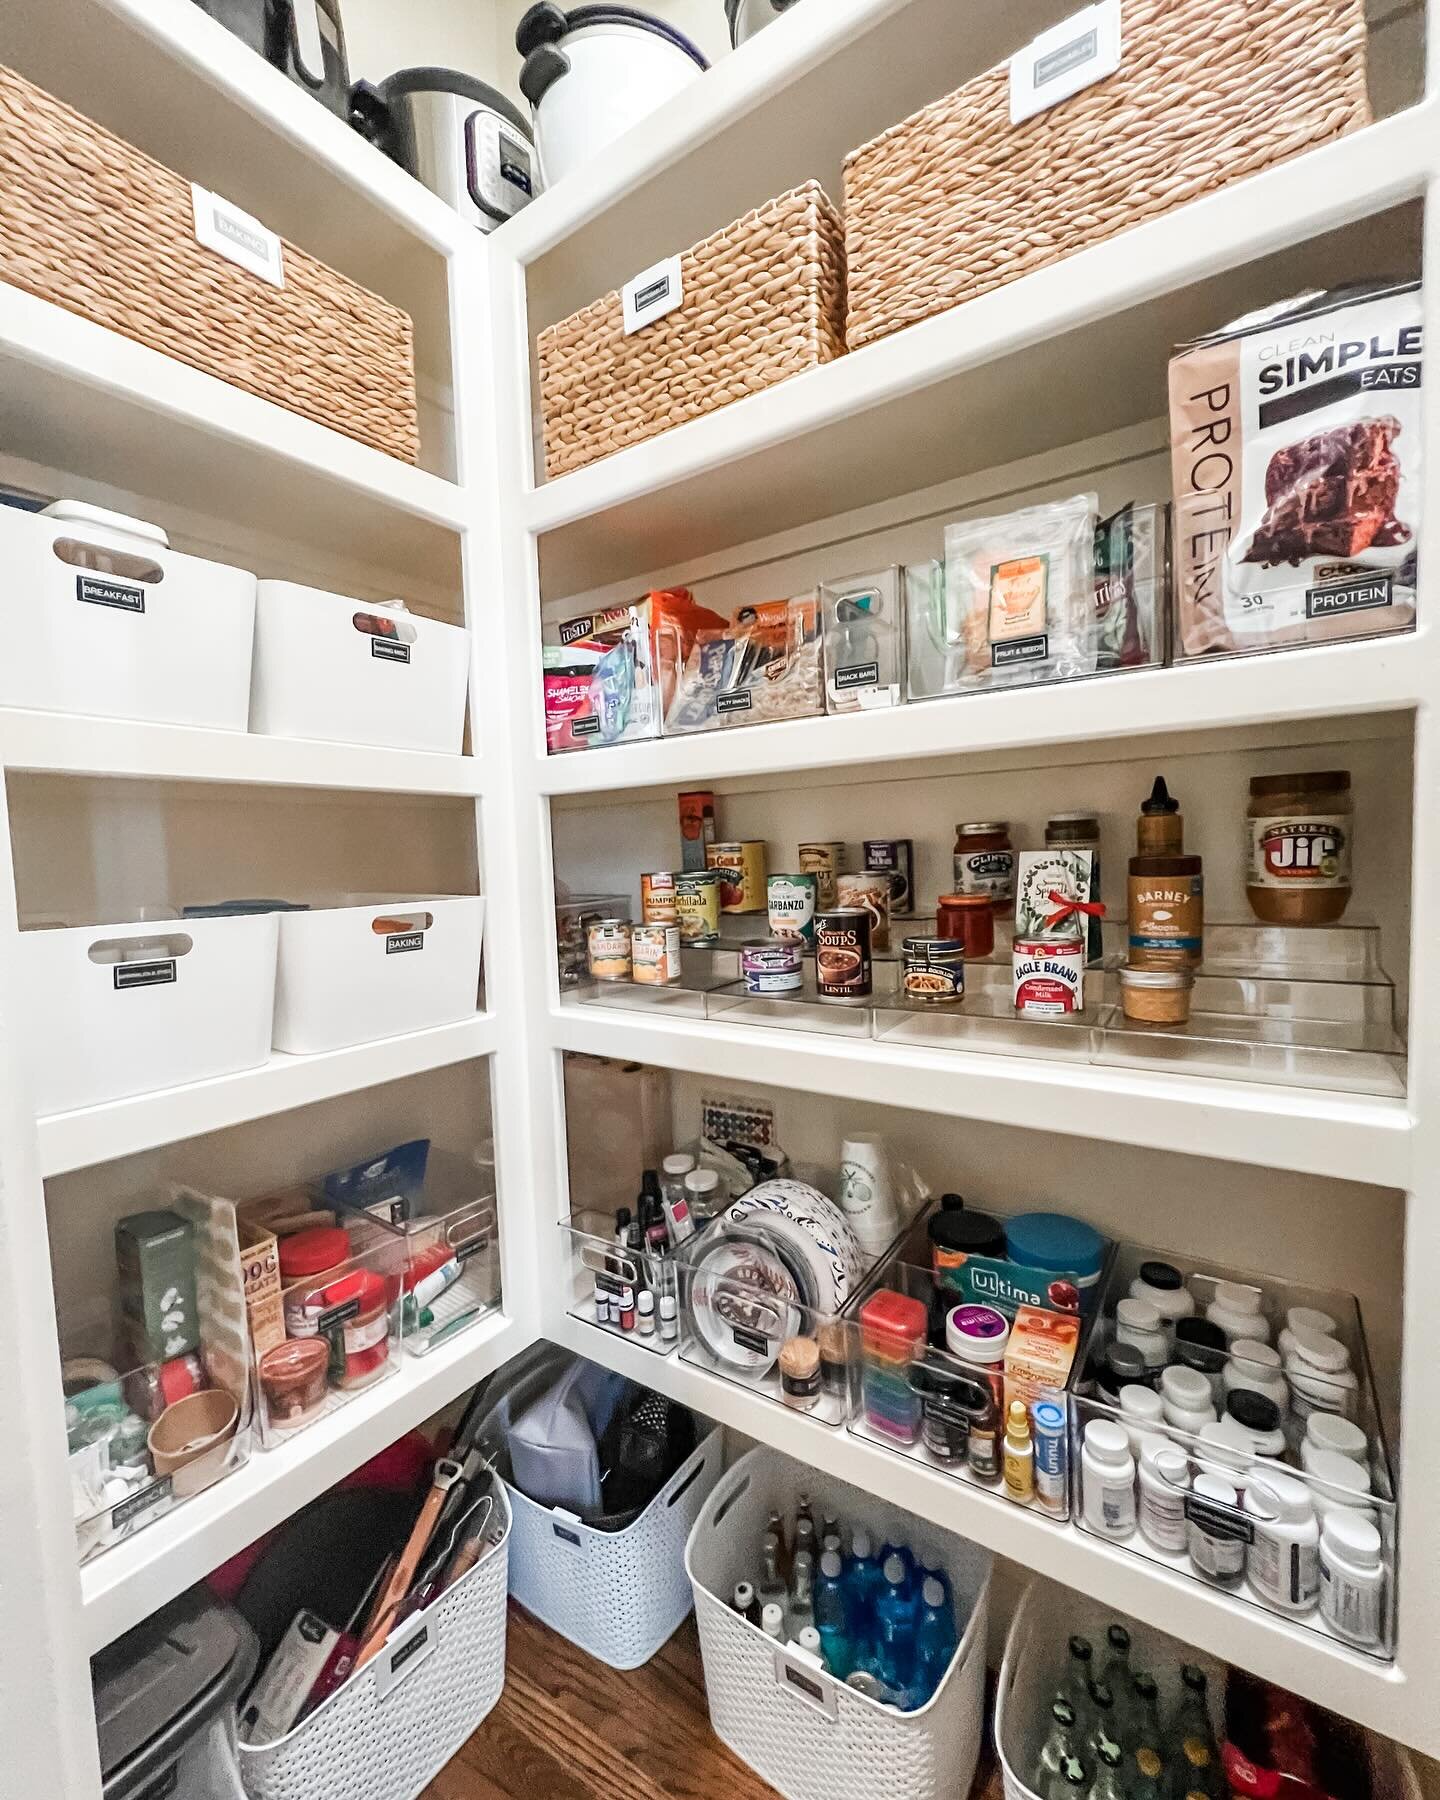 We will never get tired of a good pantry project!

Can we get a 👏🏼👏🏼👏🏼 for all the clients who get the courage to call us for help?

It&rsquo;s not easy to let strangers into your home and assess your mess but here at Mind Your Mess, we take a 